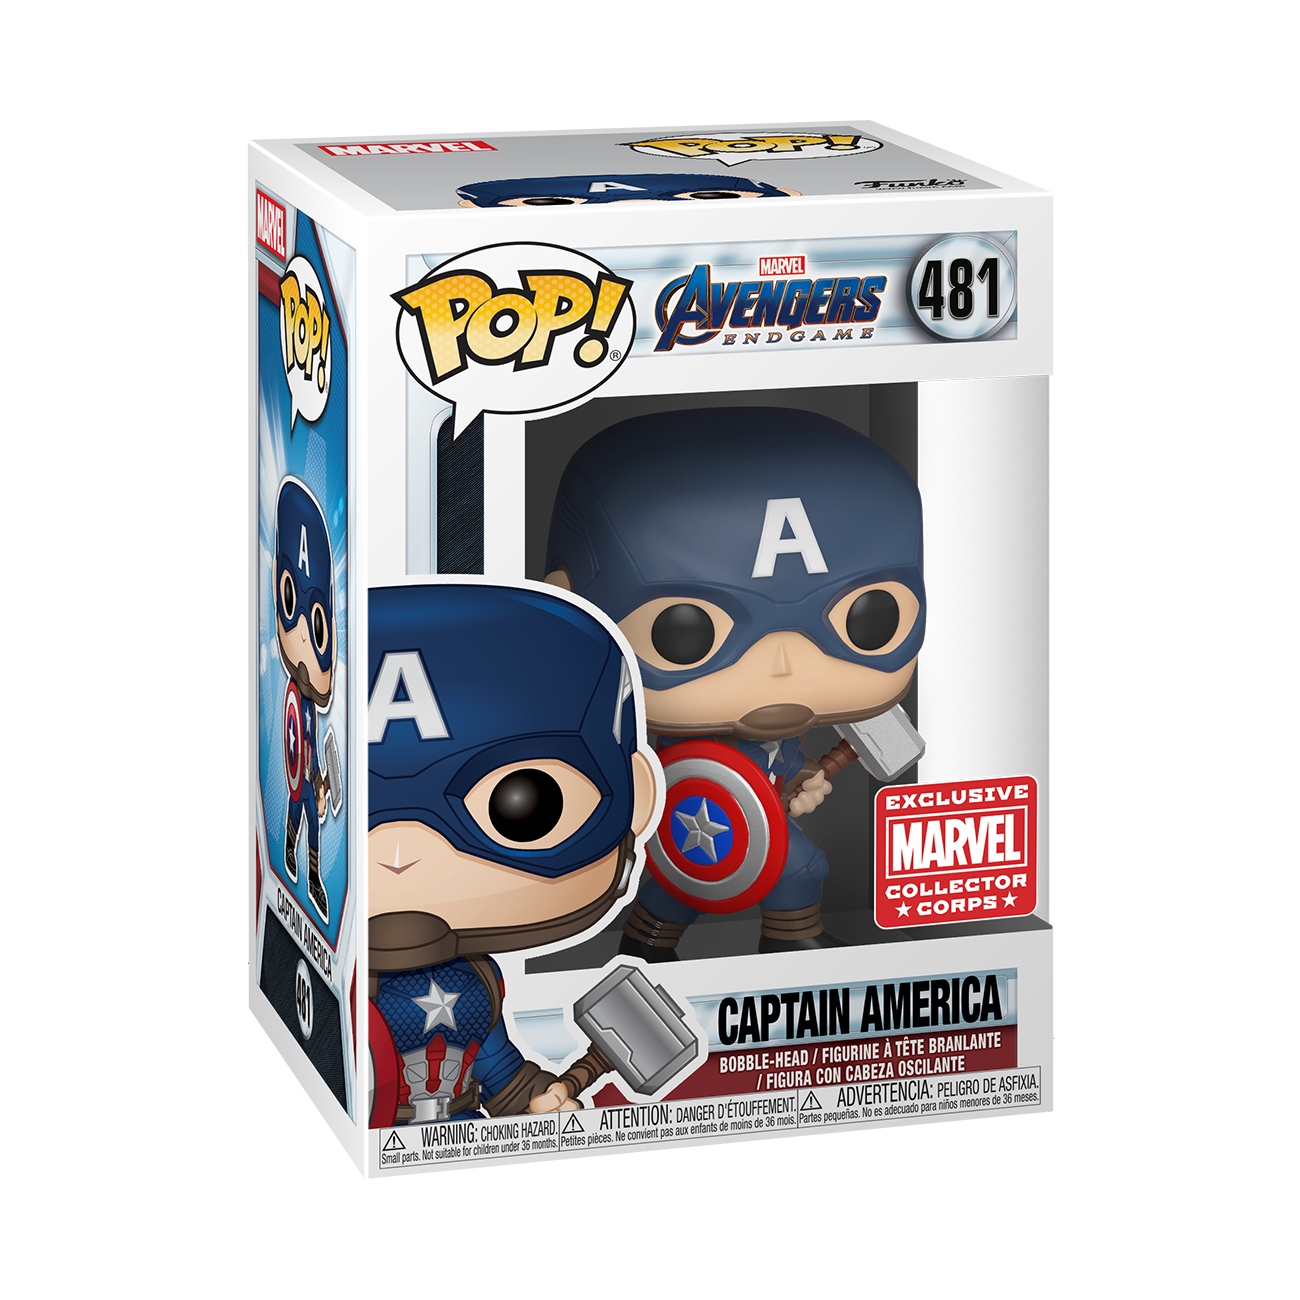 In-box look at the Amazon Marvel Collector Corps exclusive Pop! Captain America.